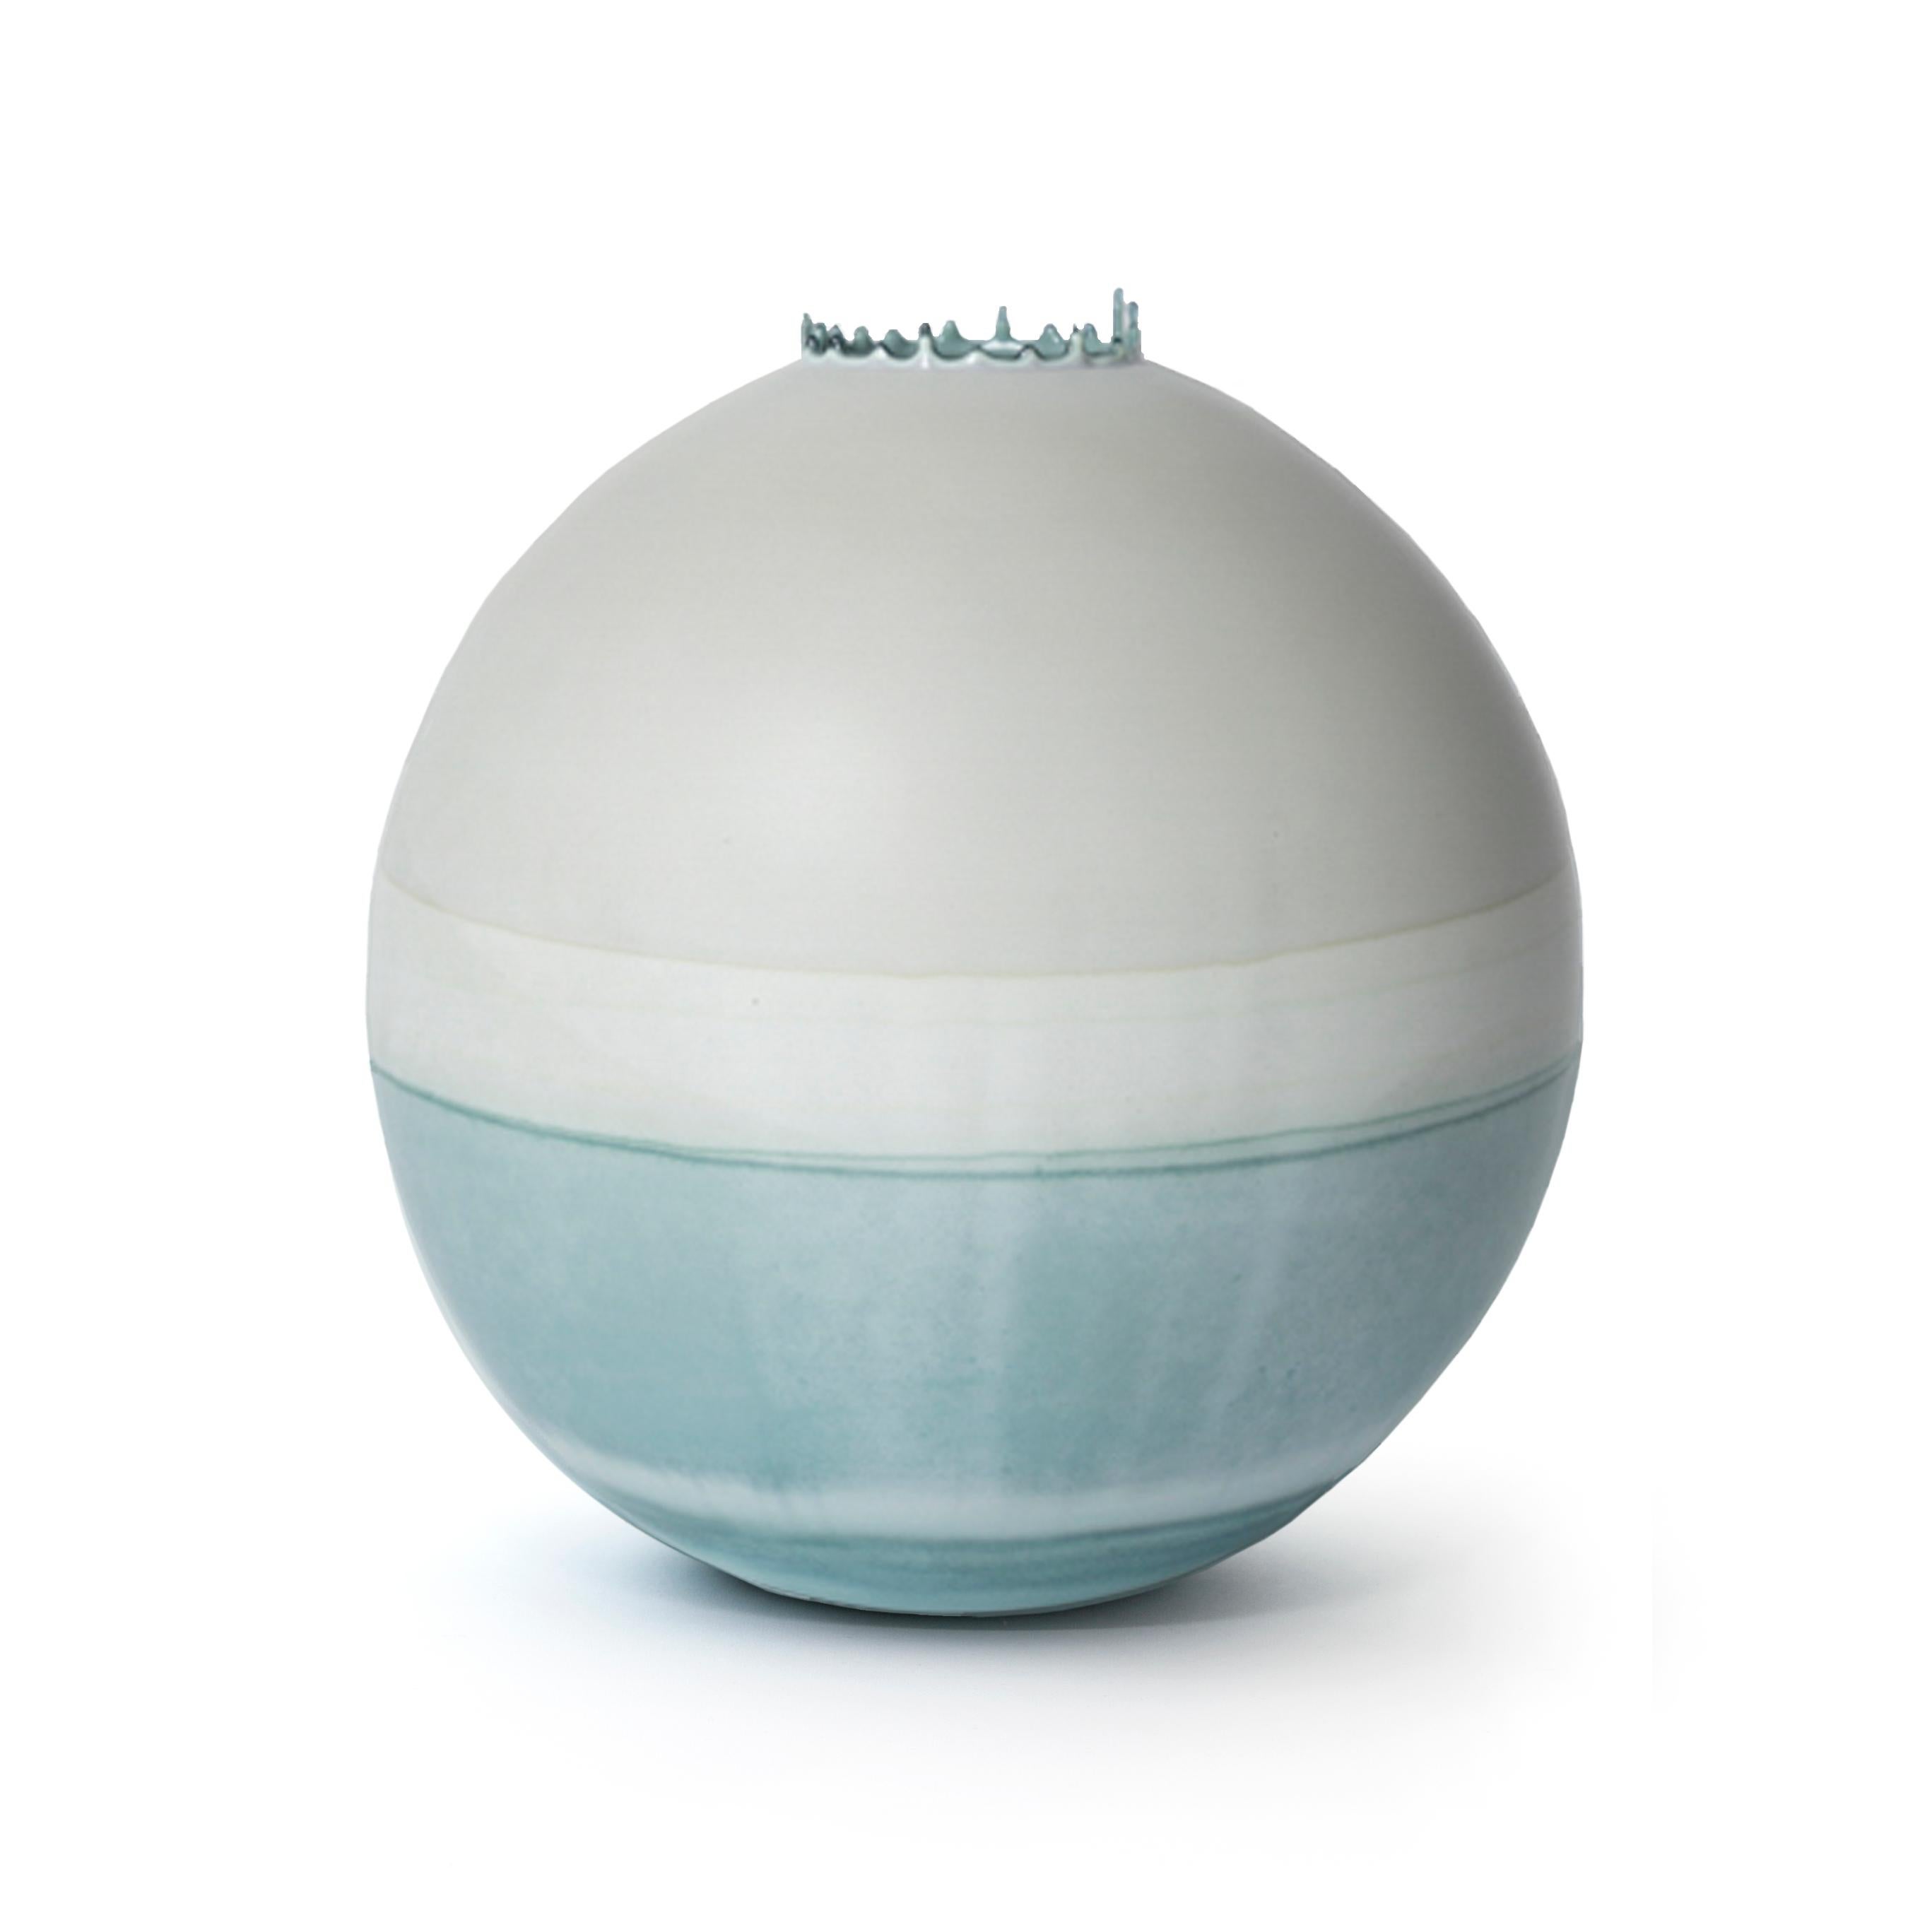 Sage and Turquoise Jupiter vase by Elyse Graham
Dimensions: W 28 x D 28 x H 30.5 cm
Materials: Plaster, Resin
Molded, dyed, and finished by hand in LA. Customization
Available.
All pieces are made to order

This collection of vessels is